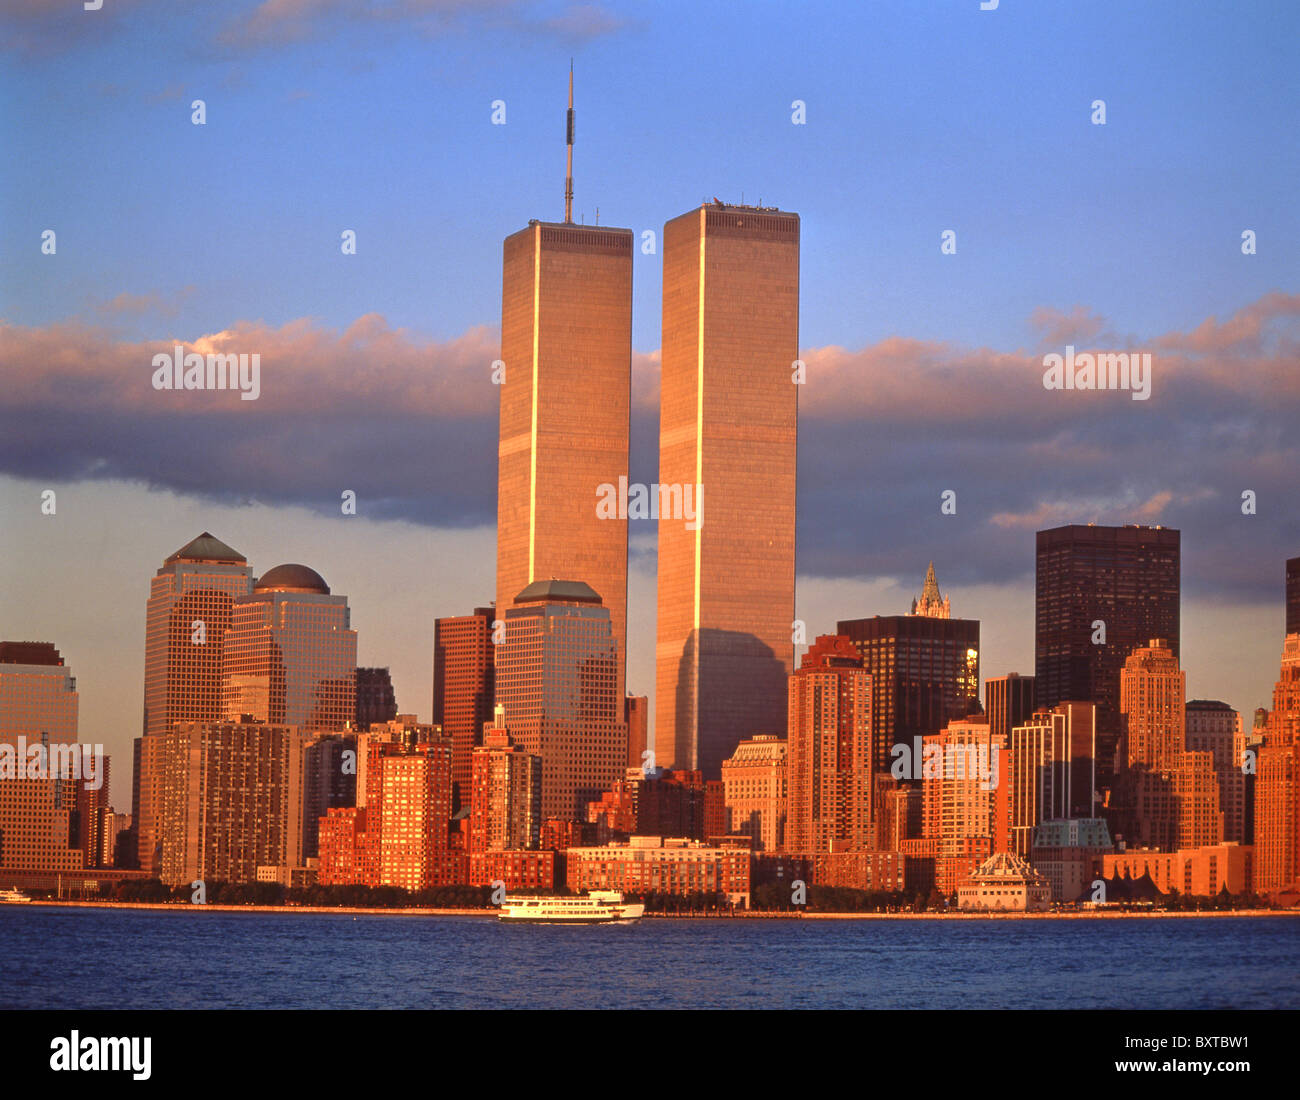 City view from harbour at sunset (showing Twin Towers), Manhattan, New York, New York State, United States of America Stock Photo